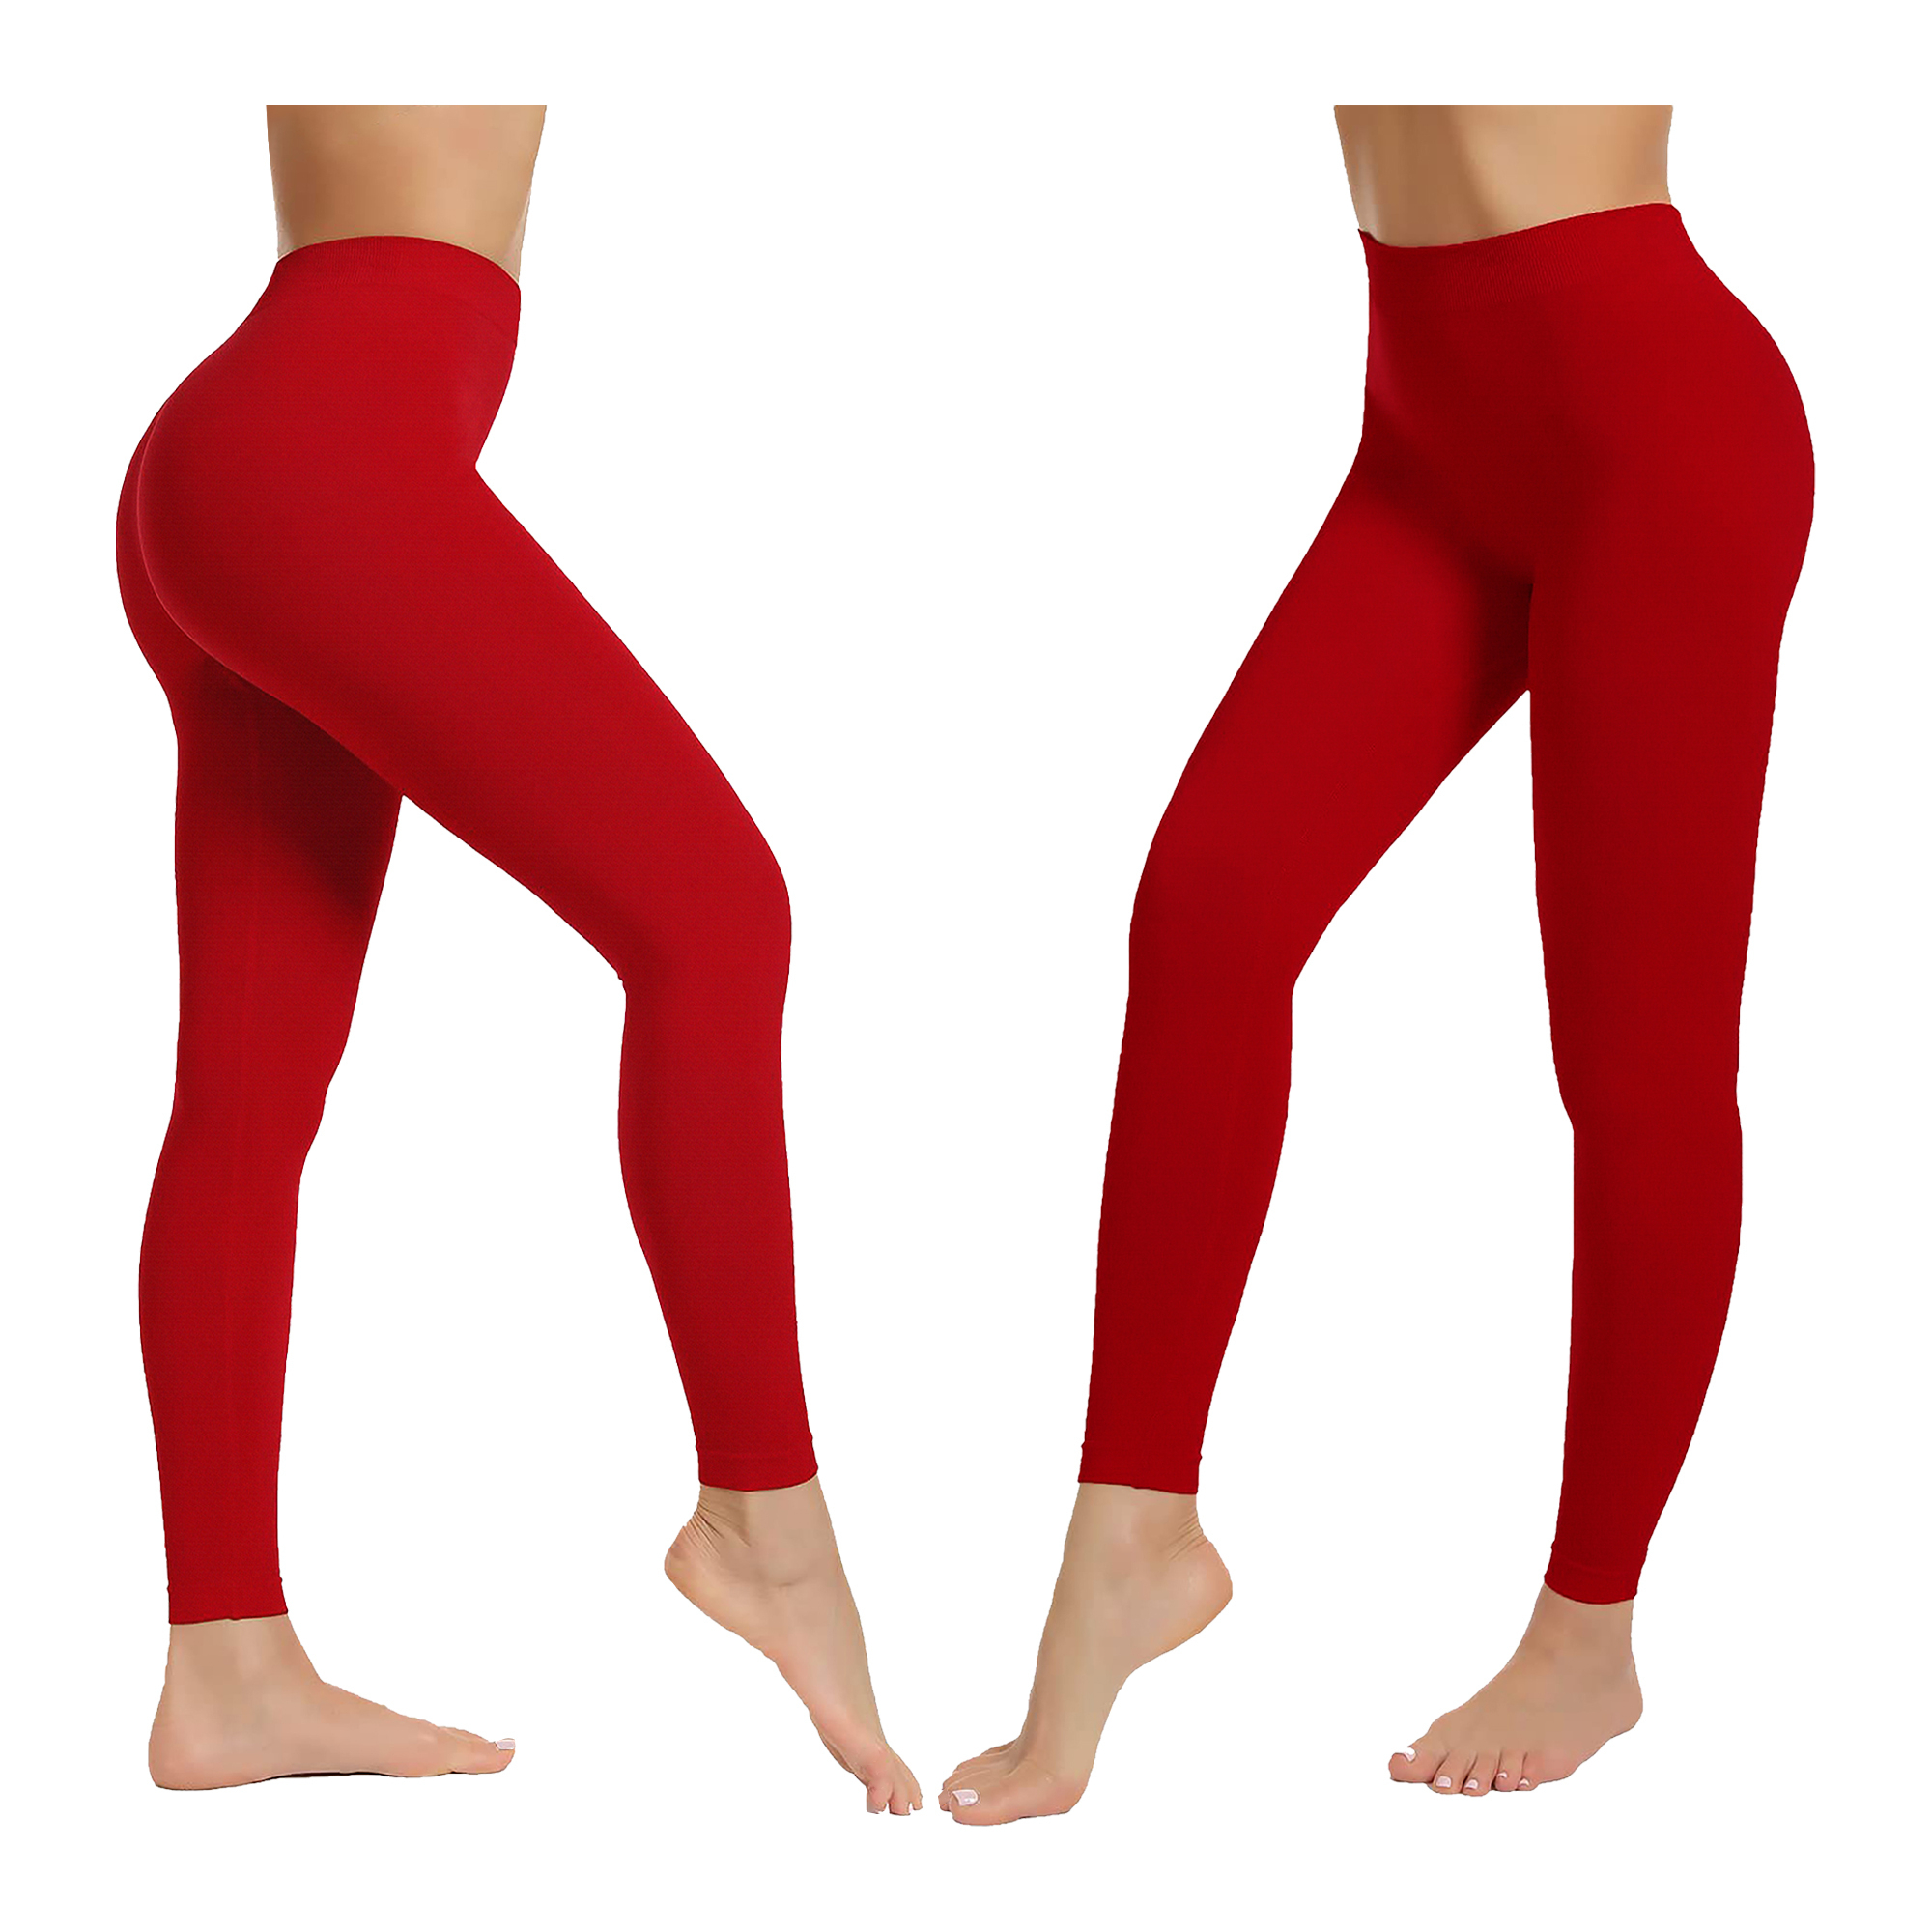 3-Pack: Women's High-Waist Ultra-Soft Stretchy Solid Fitness Yoga Leggings Pants - RED, XS